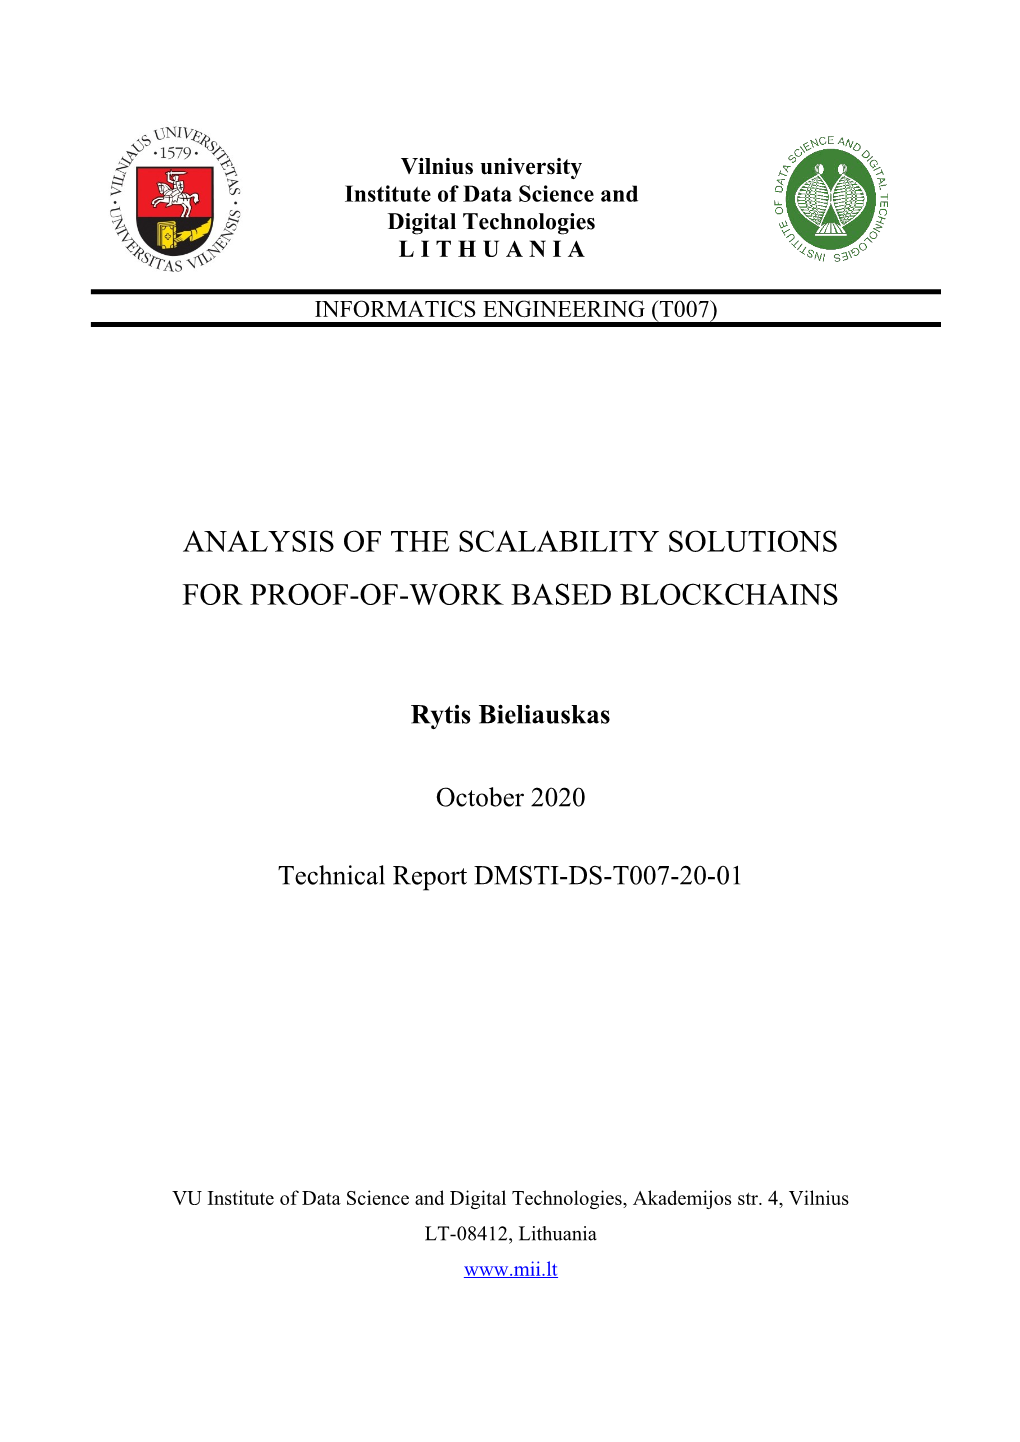 Analysis of the Scalability Solutions for Proof-Of-Work Based Blockchains